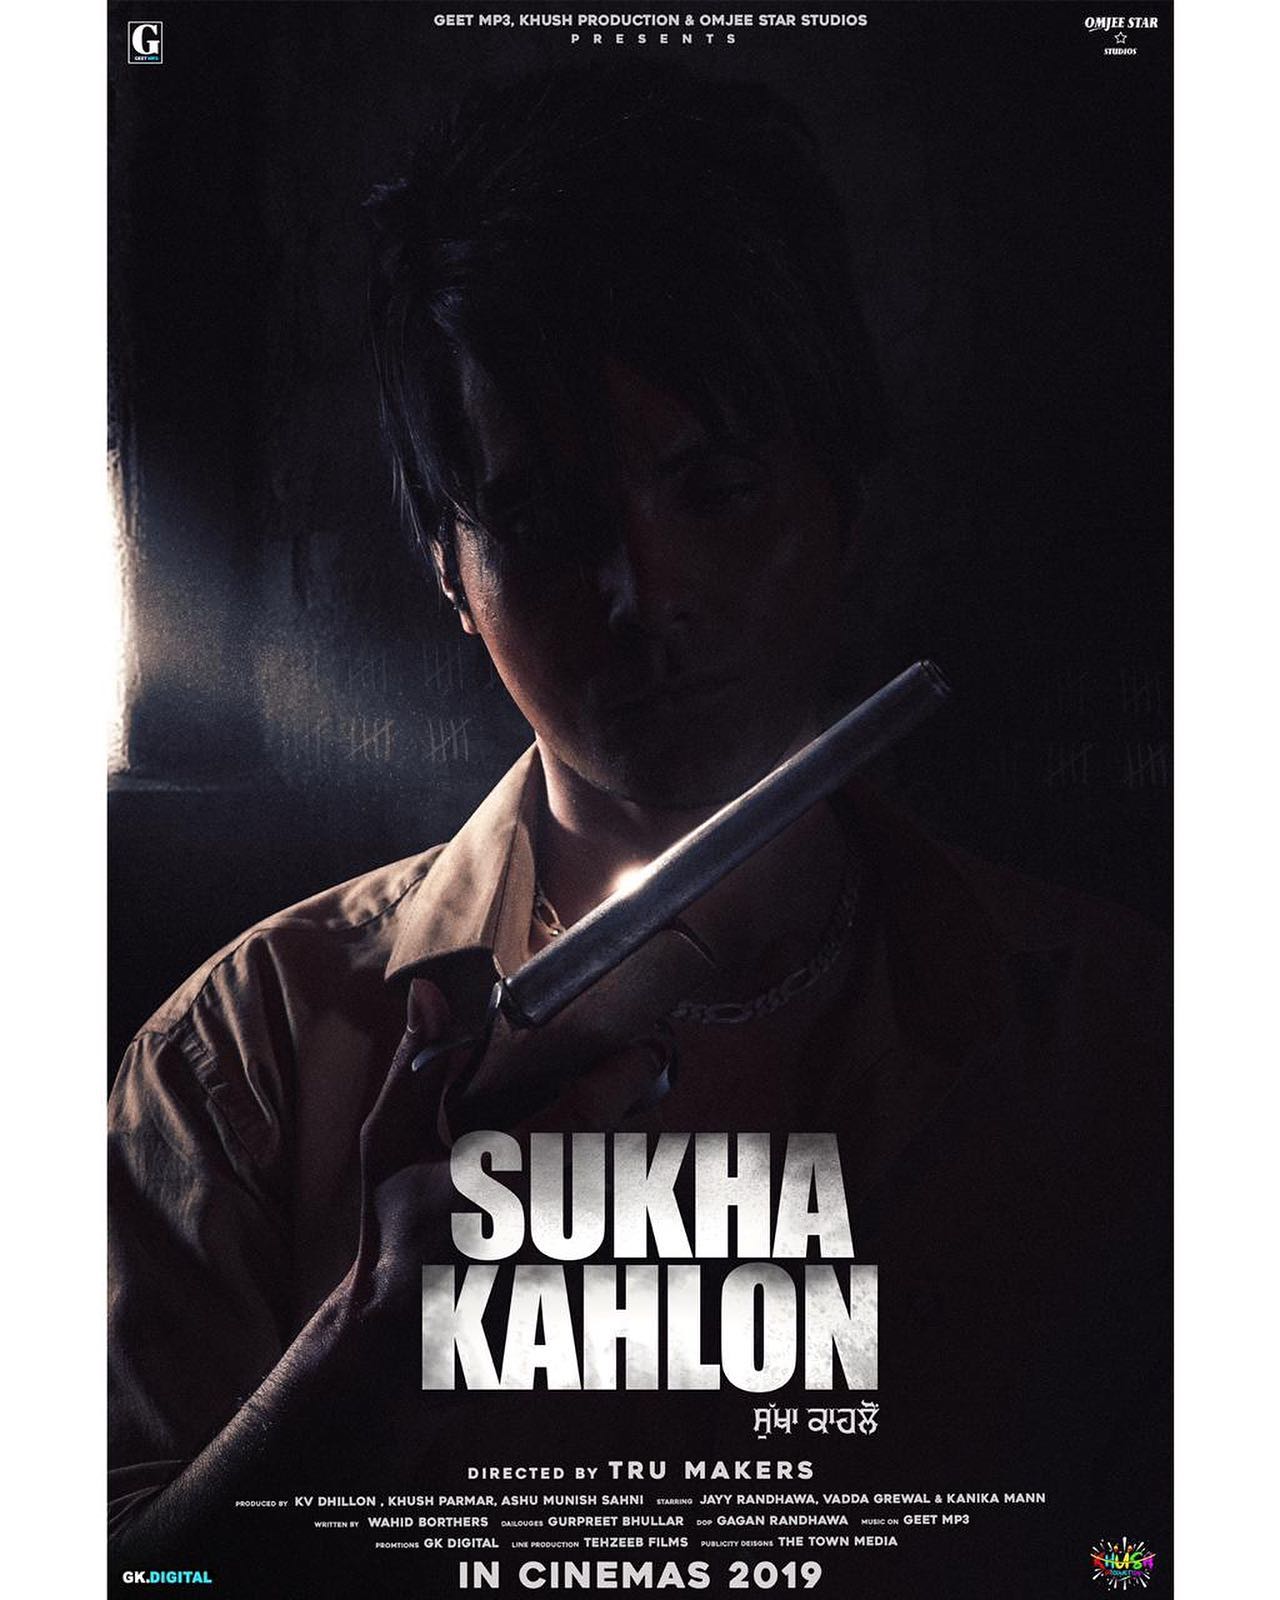 Sukha Kahlon Cast and crew wikipedia, Punjabi Movie Sukha Kahlon HD Photos wiki, Movie Release Date, News, Wallpapers, Songs, Videos First Look Poster, Director, producer, Star casts, Total Songs, Trailer, Release Date, Budget, Story line